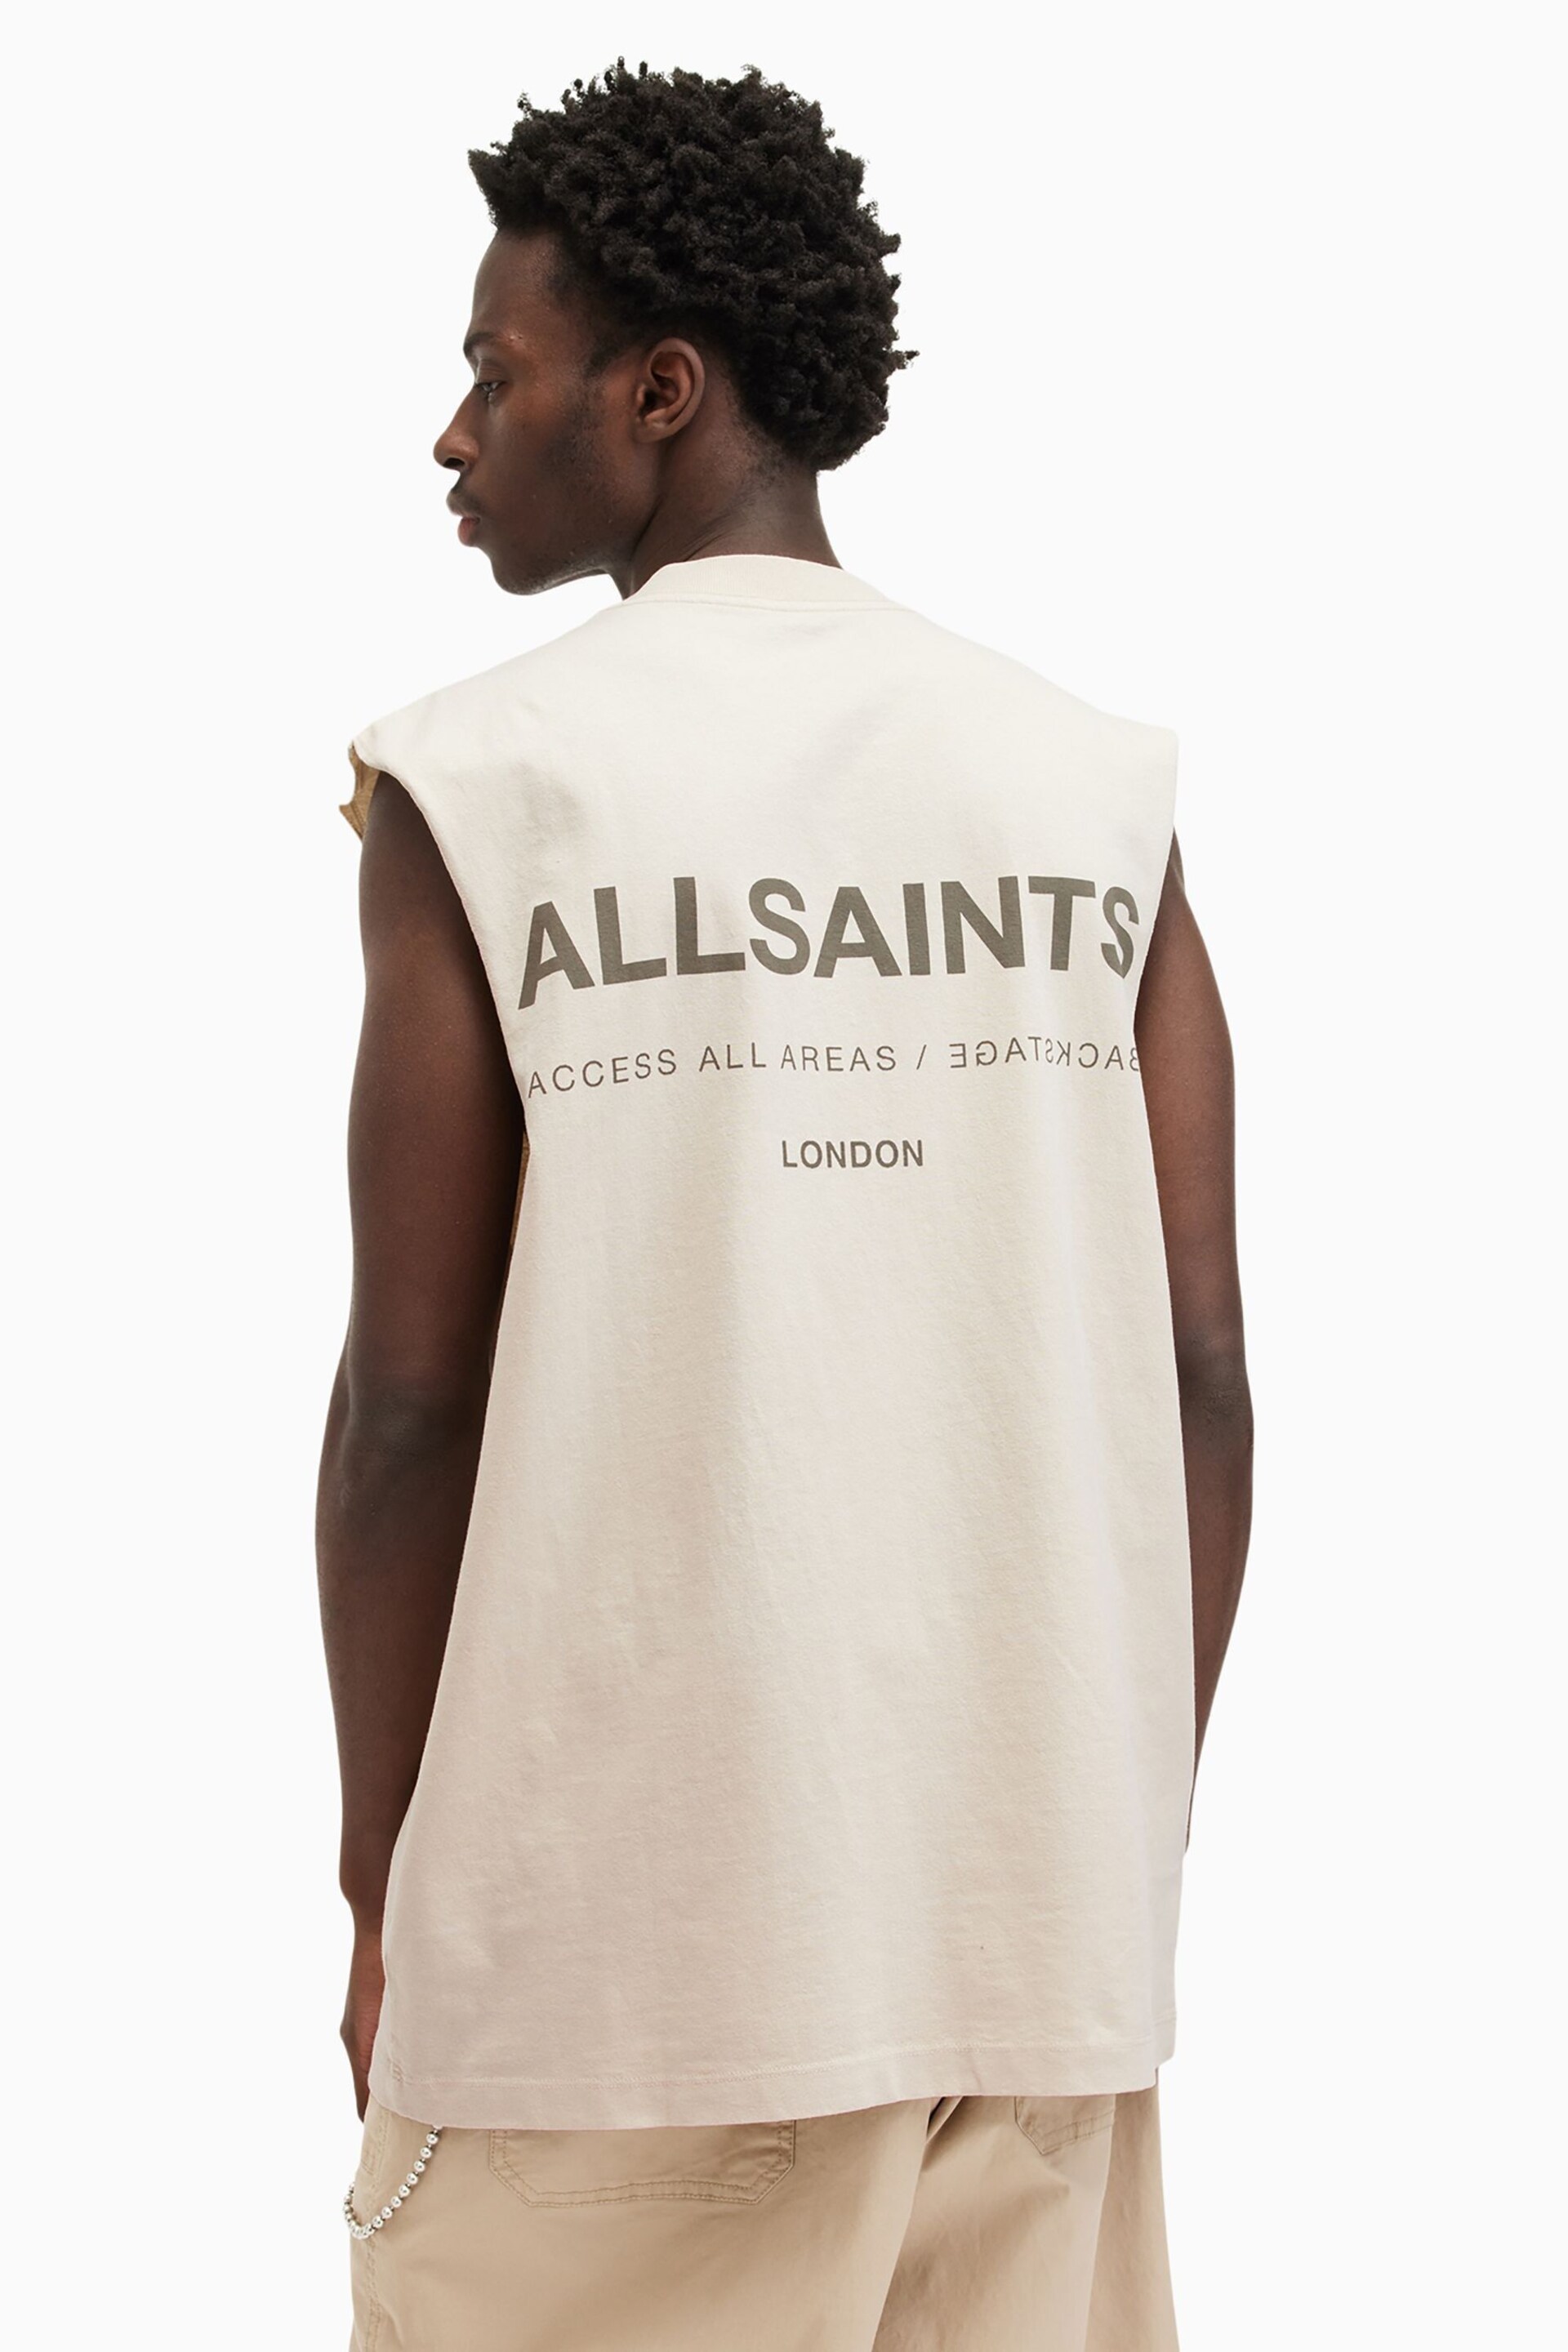 AllSaints Nude Access Short Sleeve Crew T-Shirt - Image 3 of 8